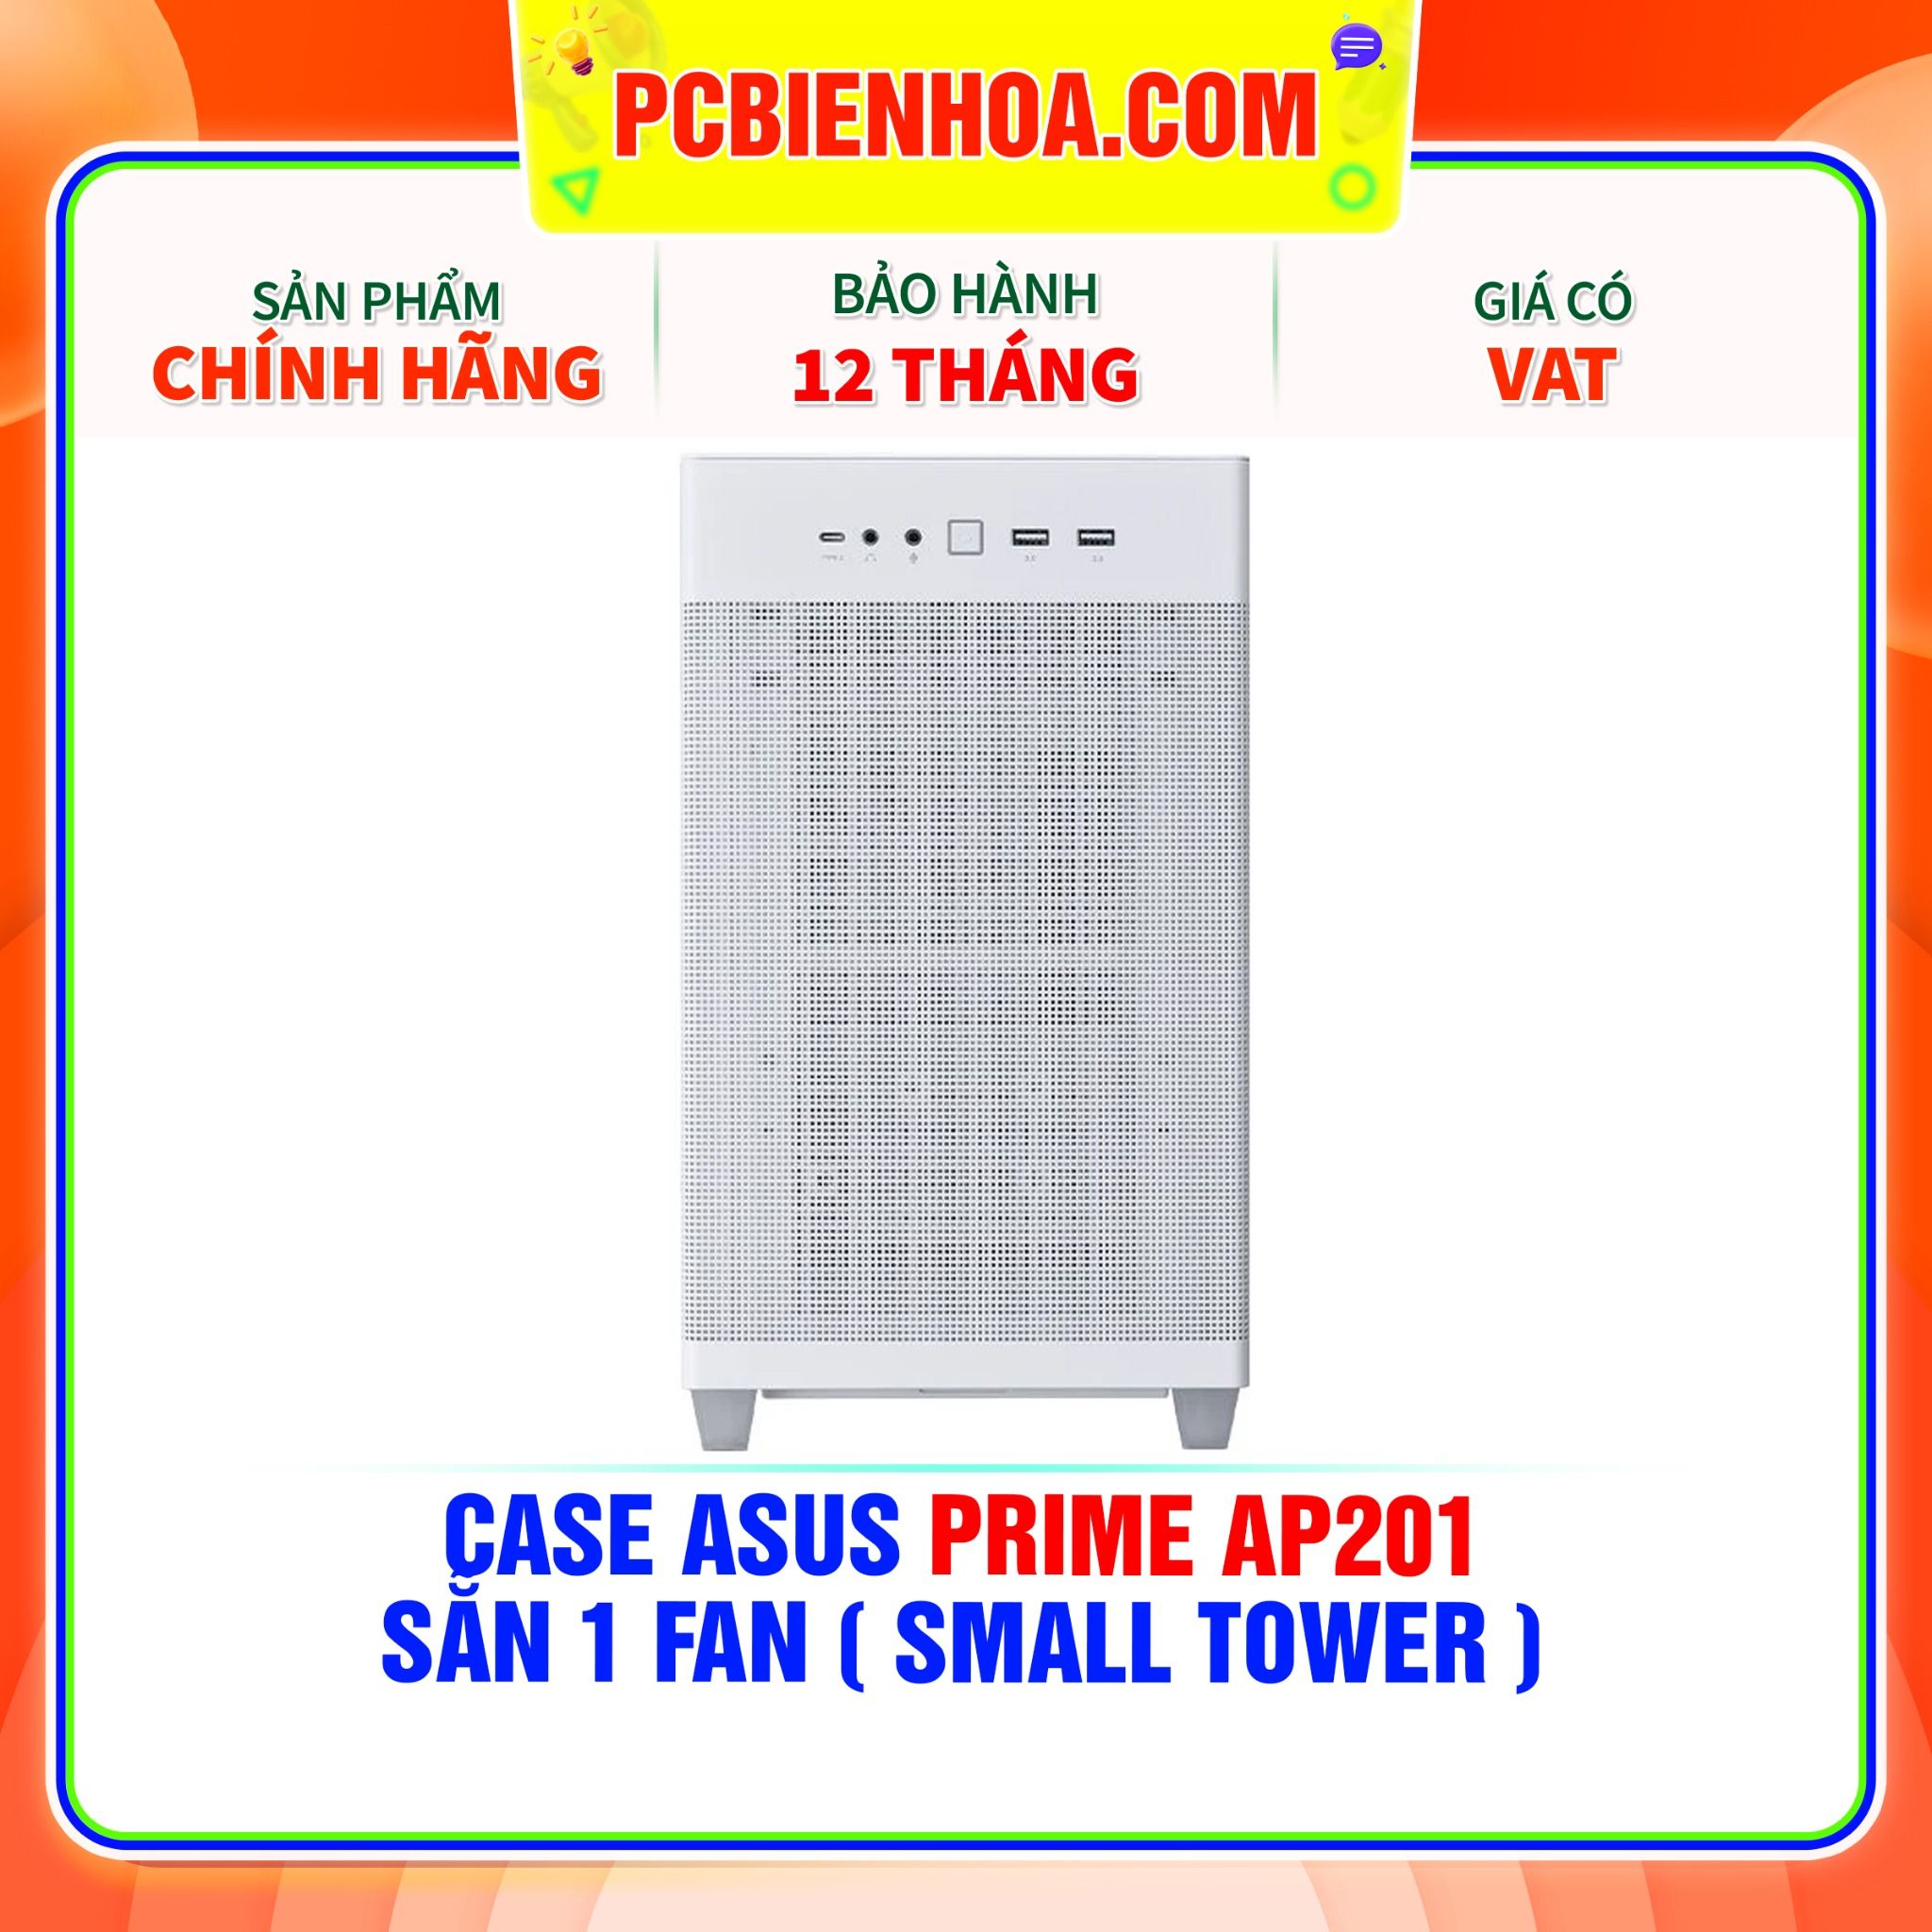  CASE ASUS PRIME AP201 - SẴN 1 FAN ( SMALL TOWER ) 